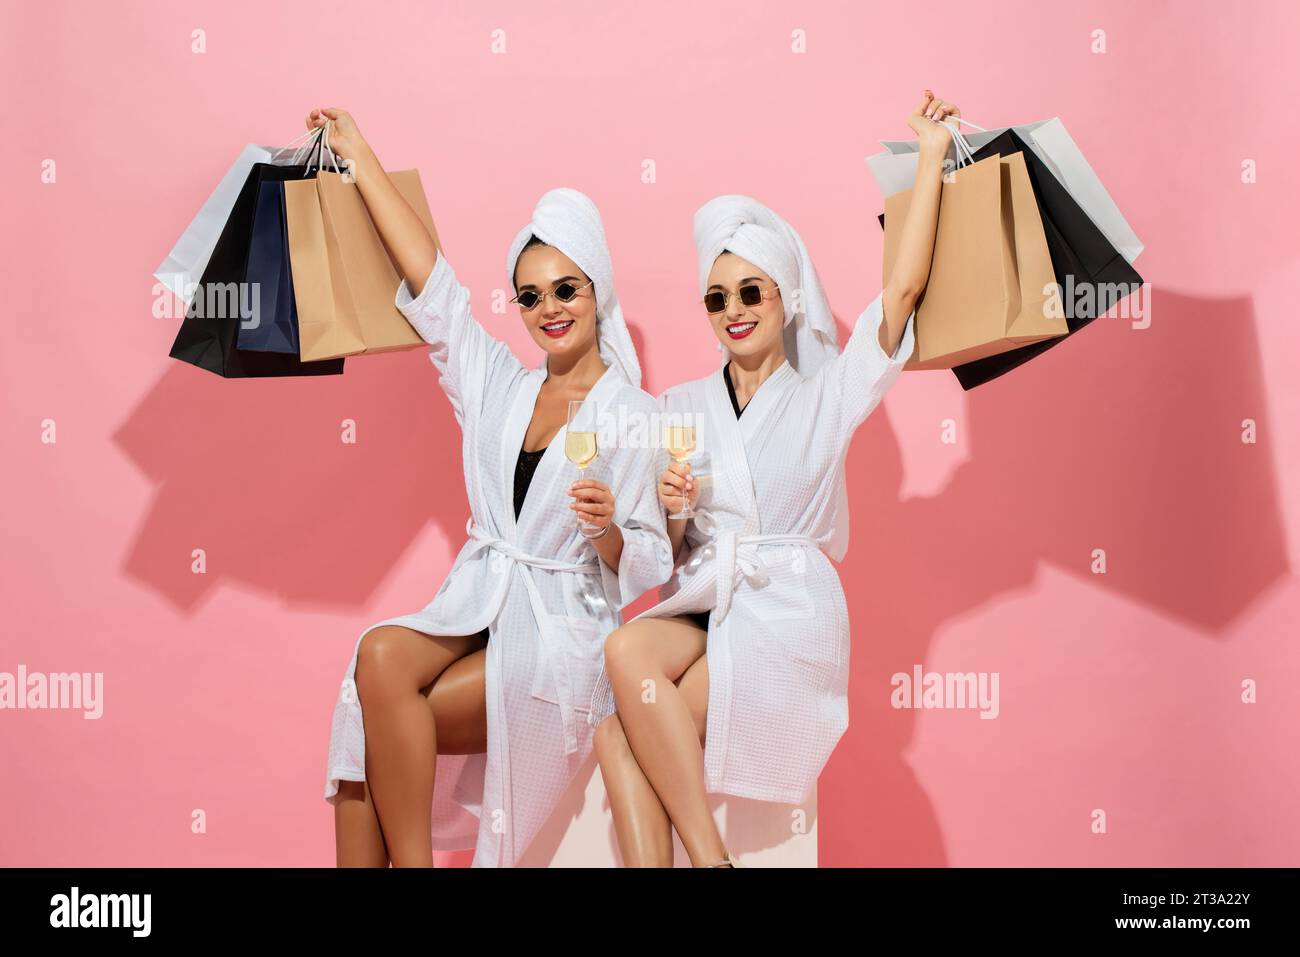 Two woman friends wearing spa bathrobes holding shopping bags and drinks in pink color isolated background studio shot Stock Photo